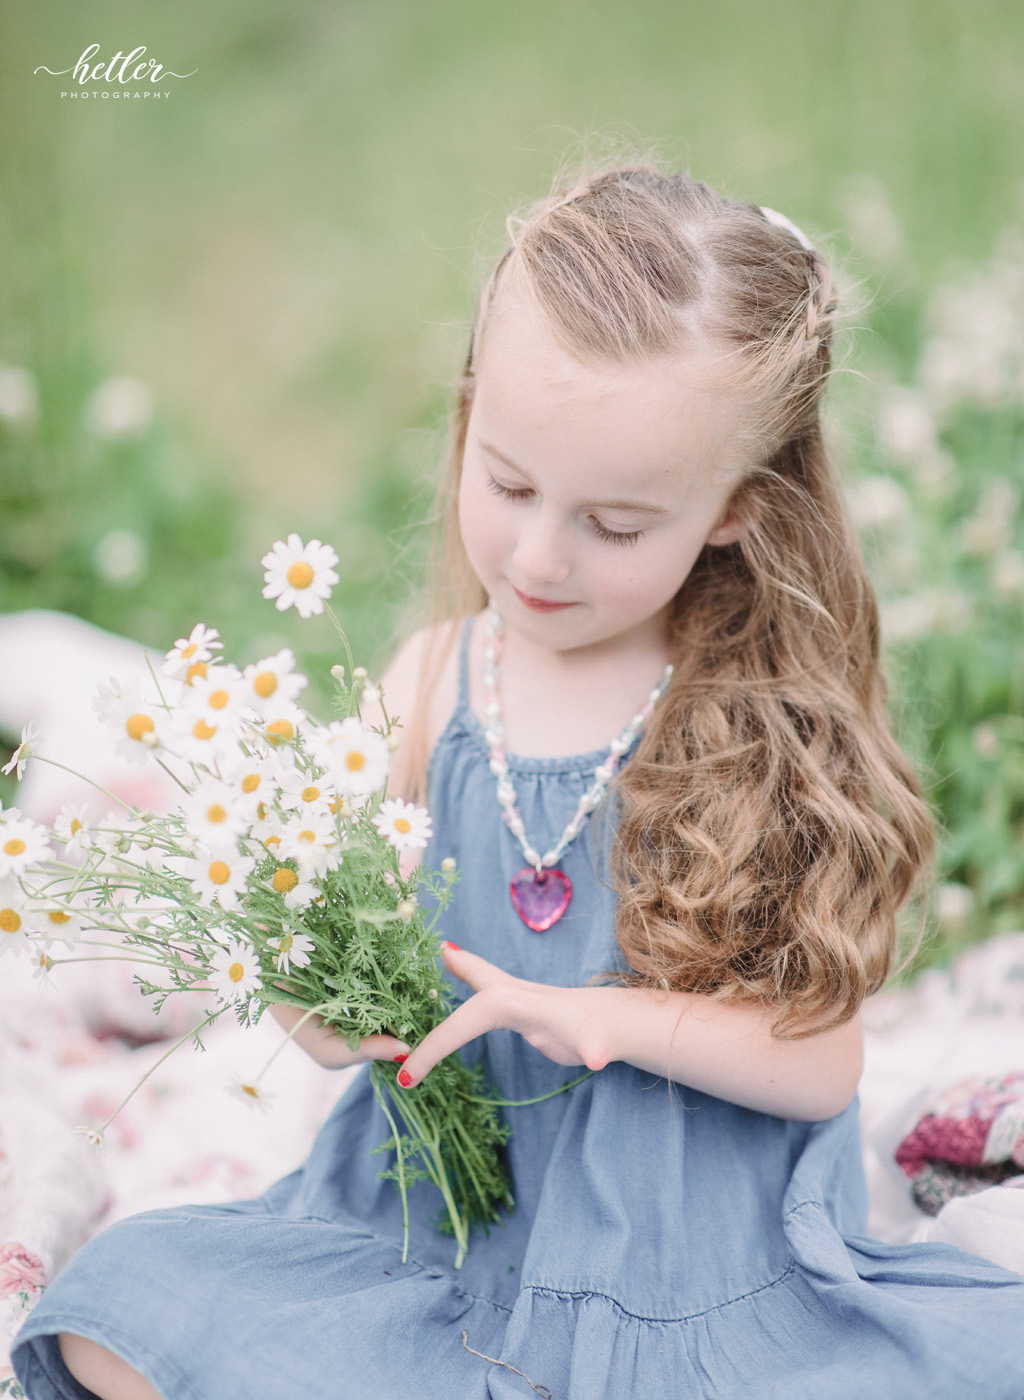 Grand Rapids light and airy family photos in a wildflower field with a lucky fin daughter